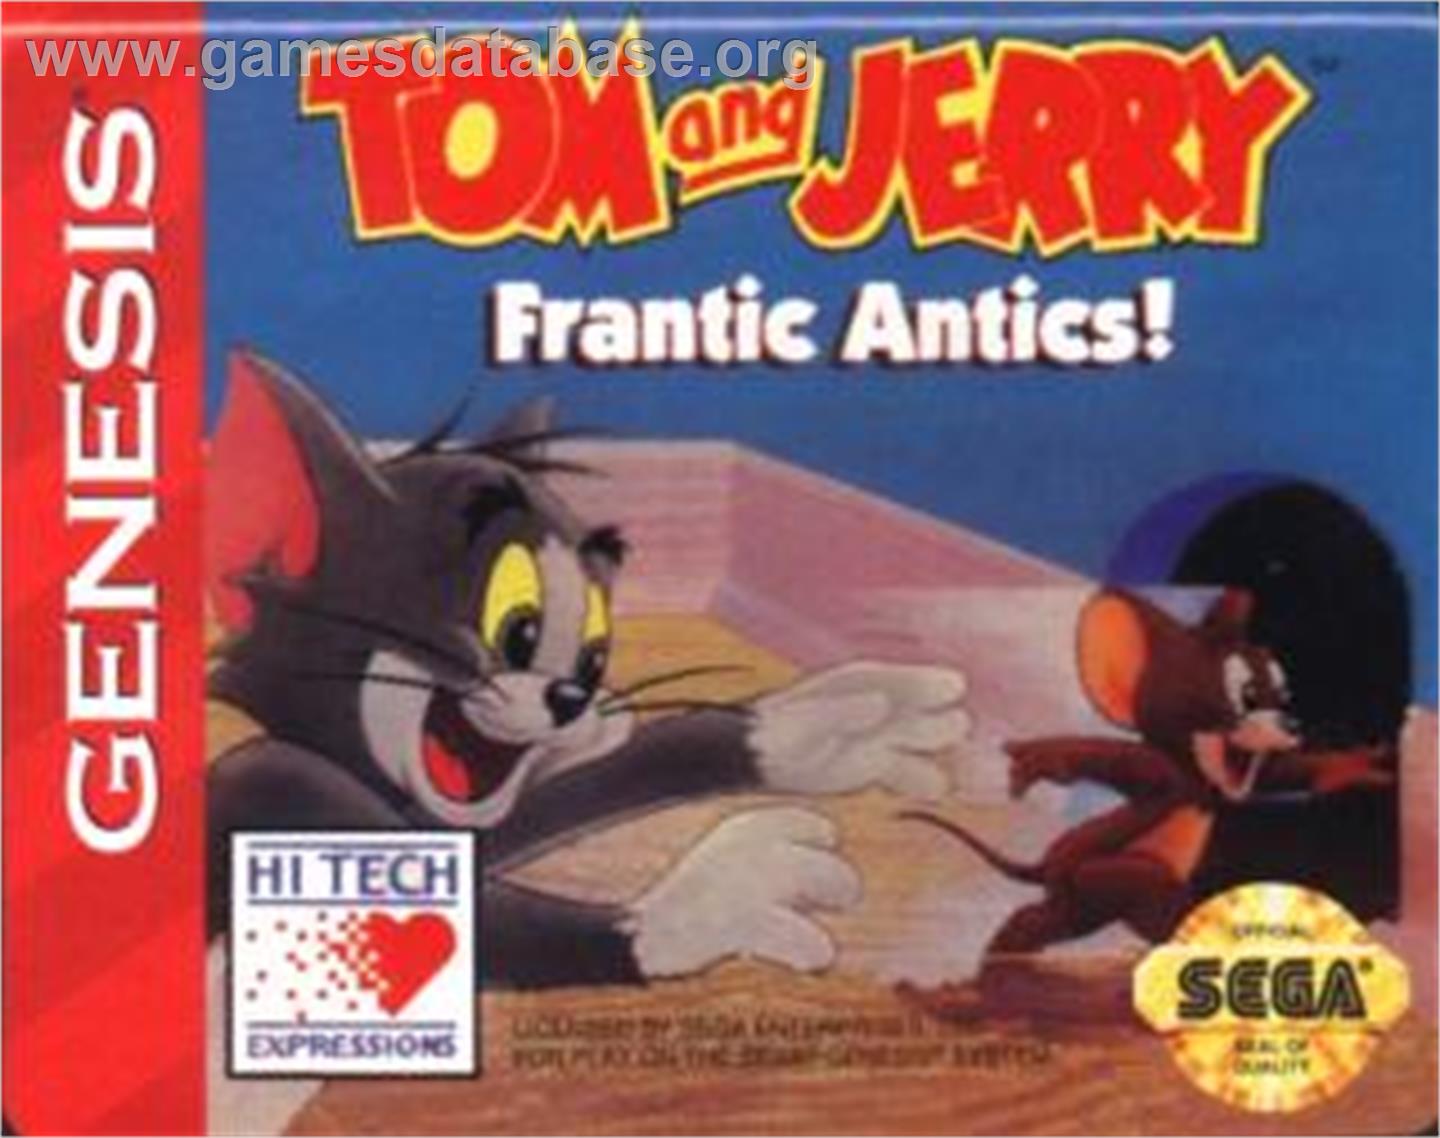 WHY ARE THE FORUMS SO QUIET? Tom_and_Jerry_-_Frantic_Antics_-_1993_-_Altron